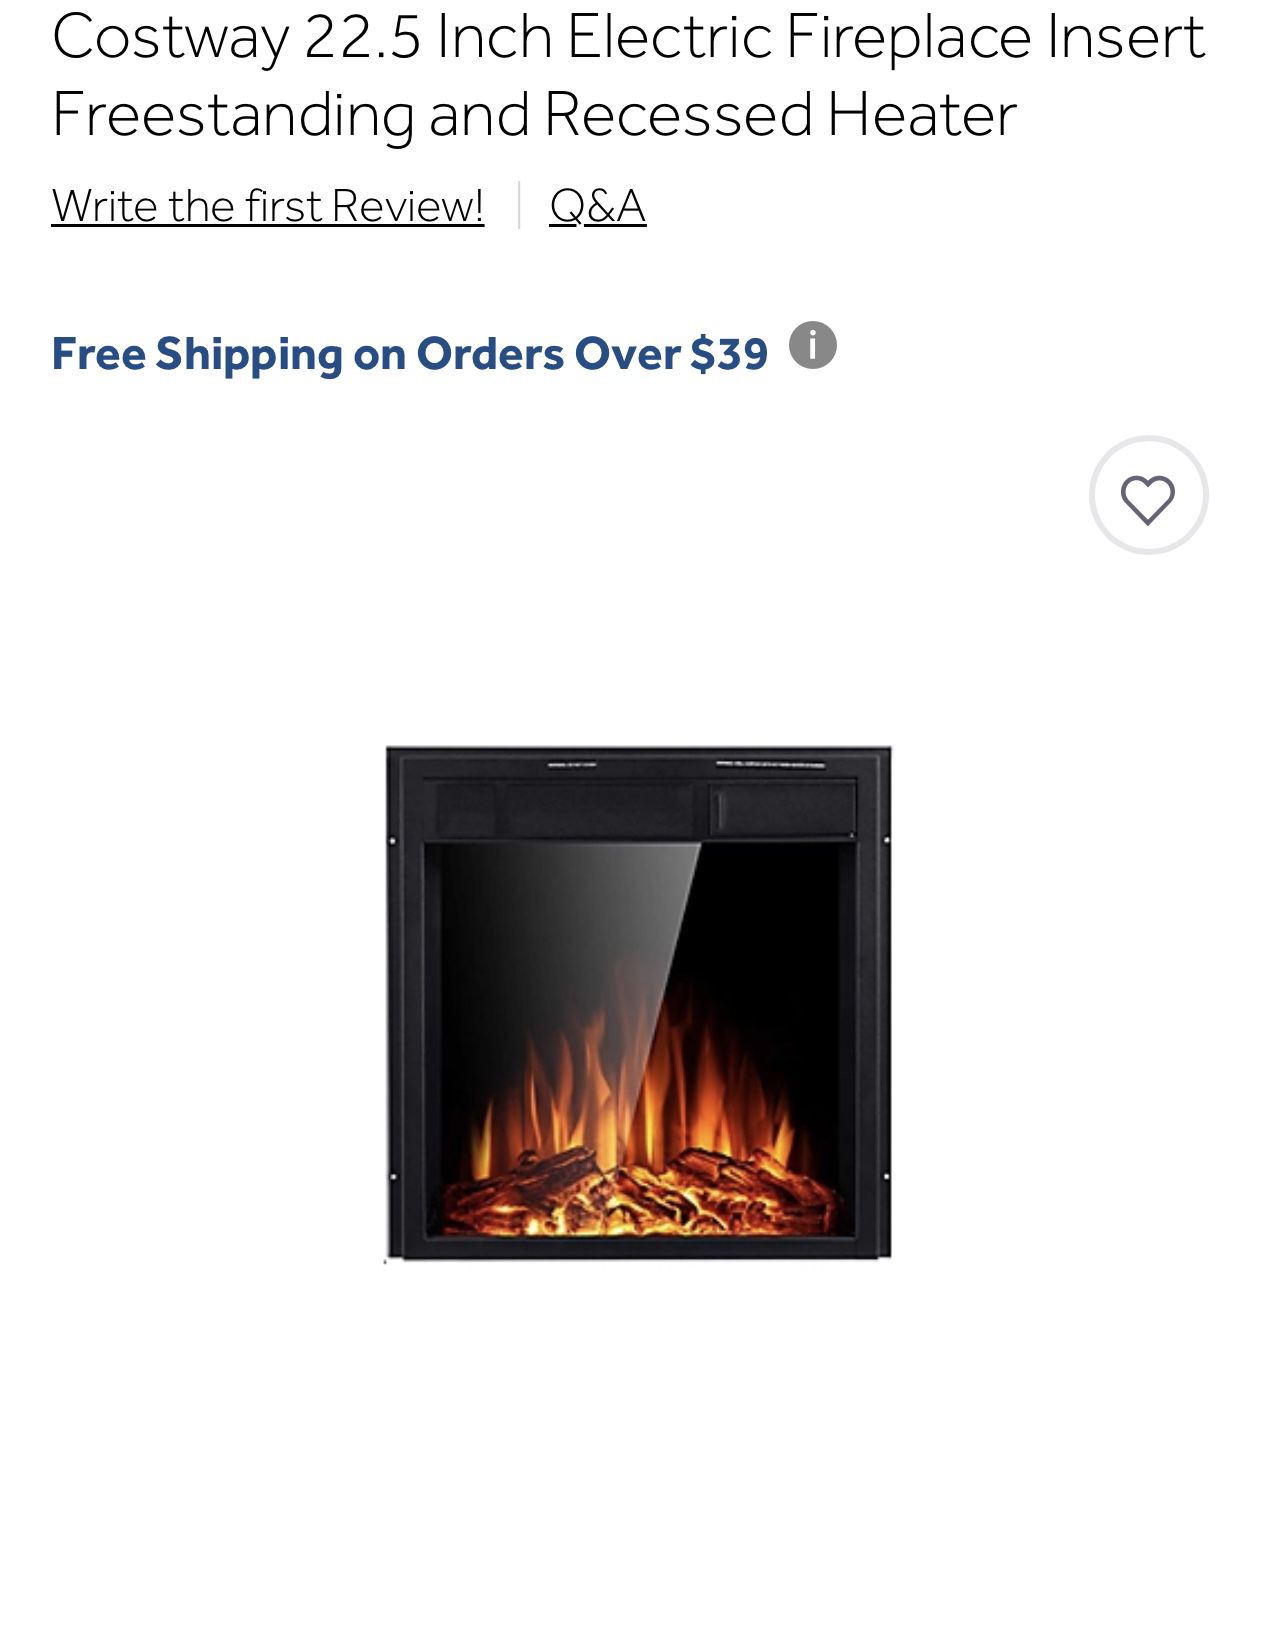  22.5 Inch Electric Fireplace Insert Freestanding and Recessed Heater